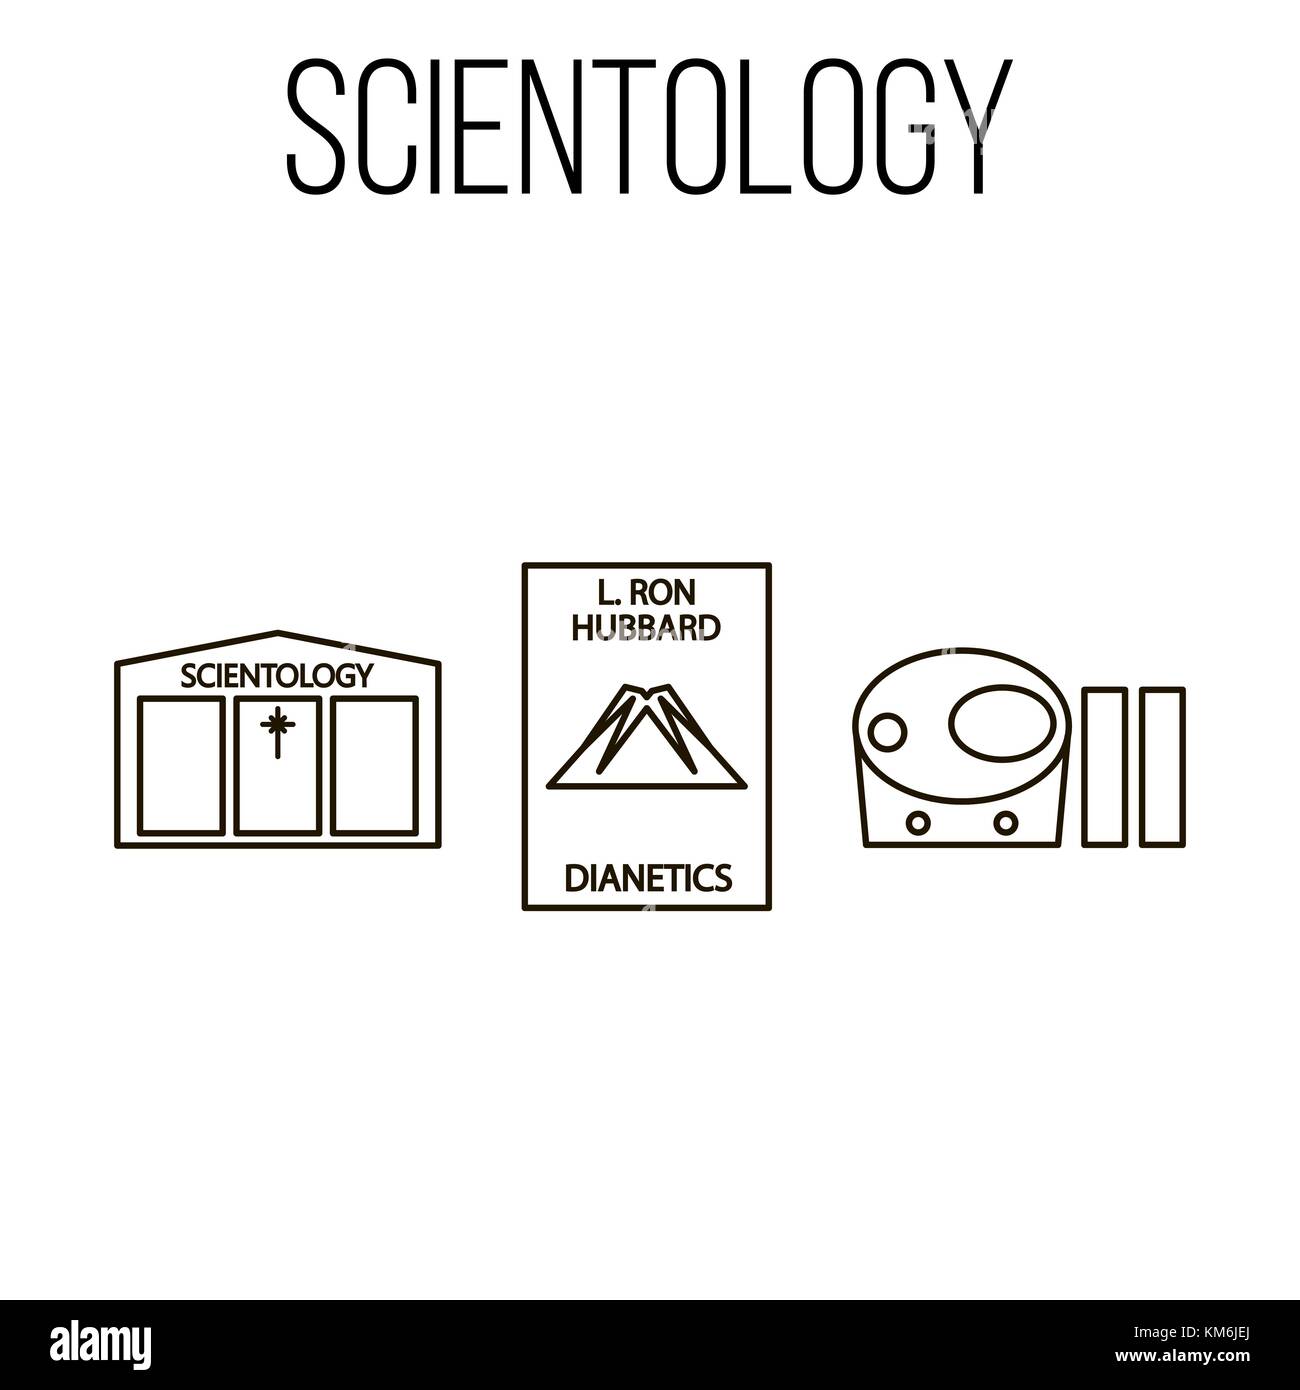 scientology symbol meaning